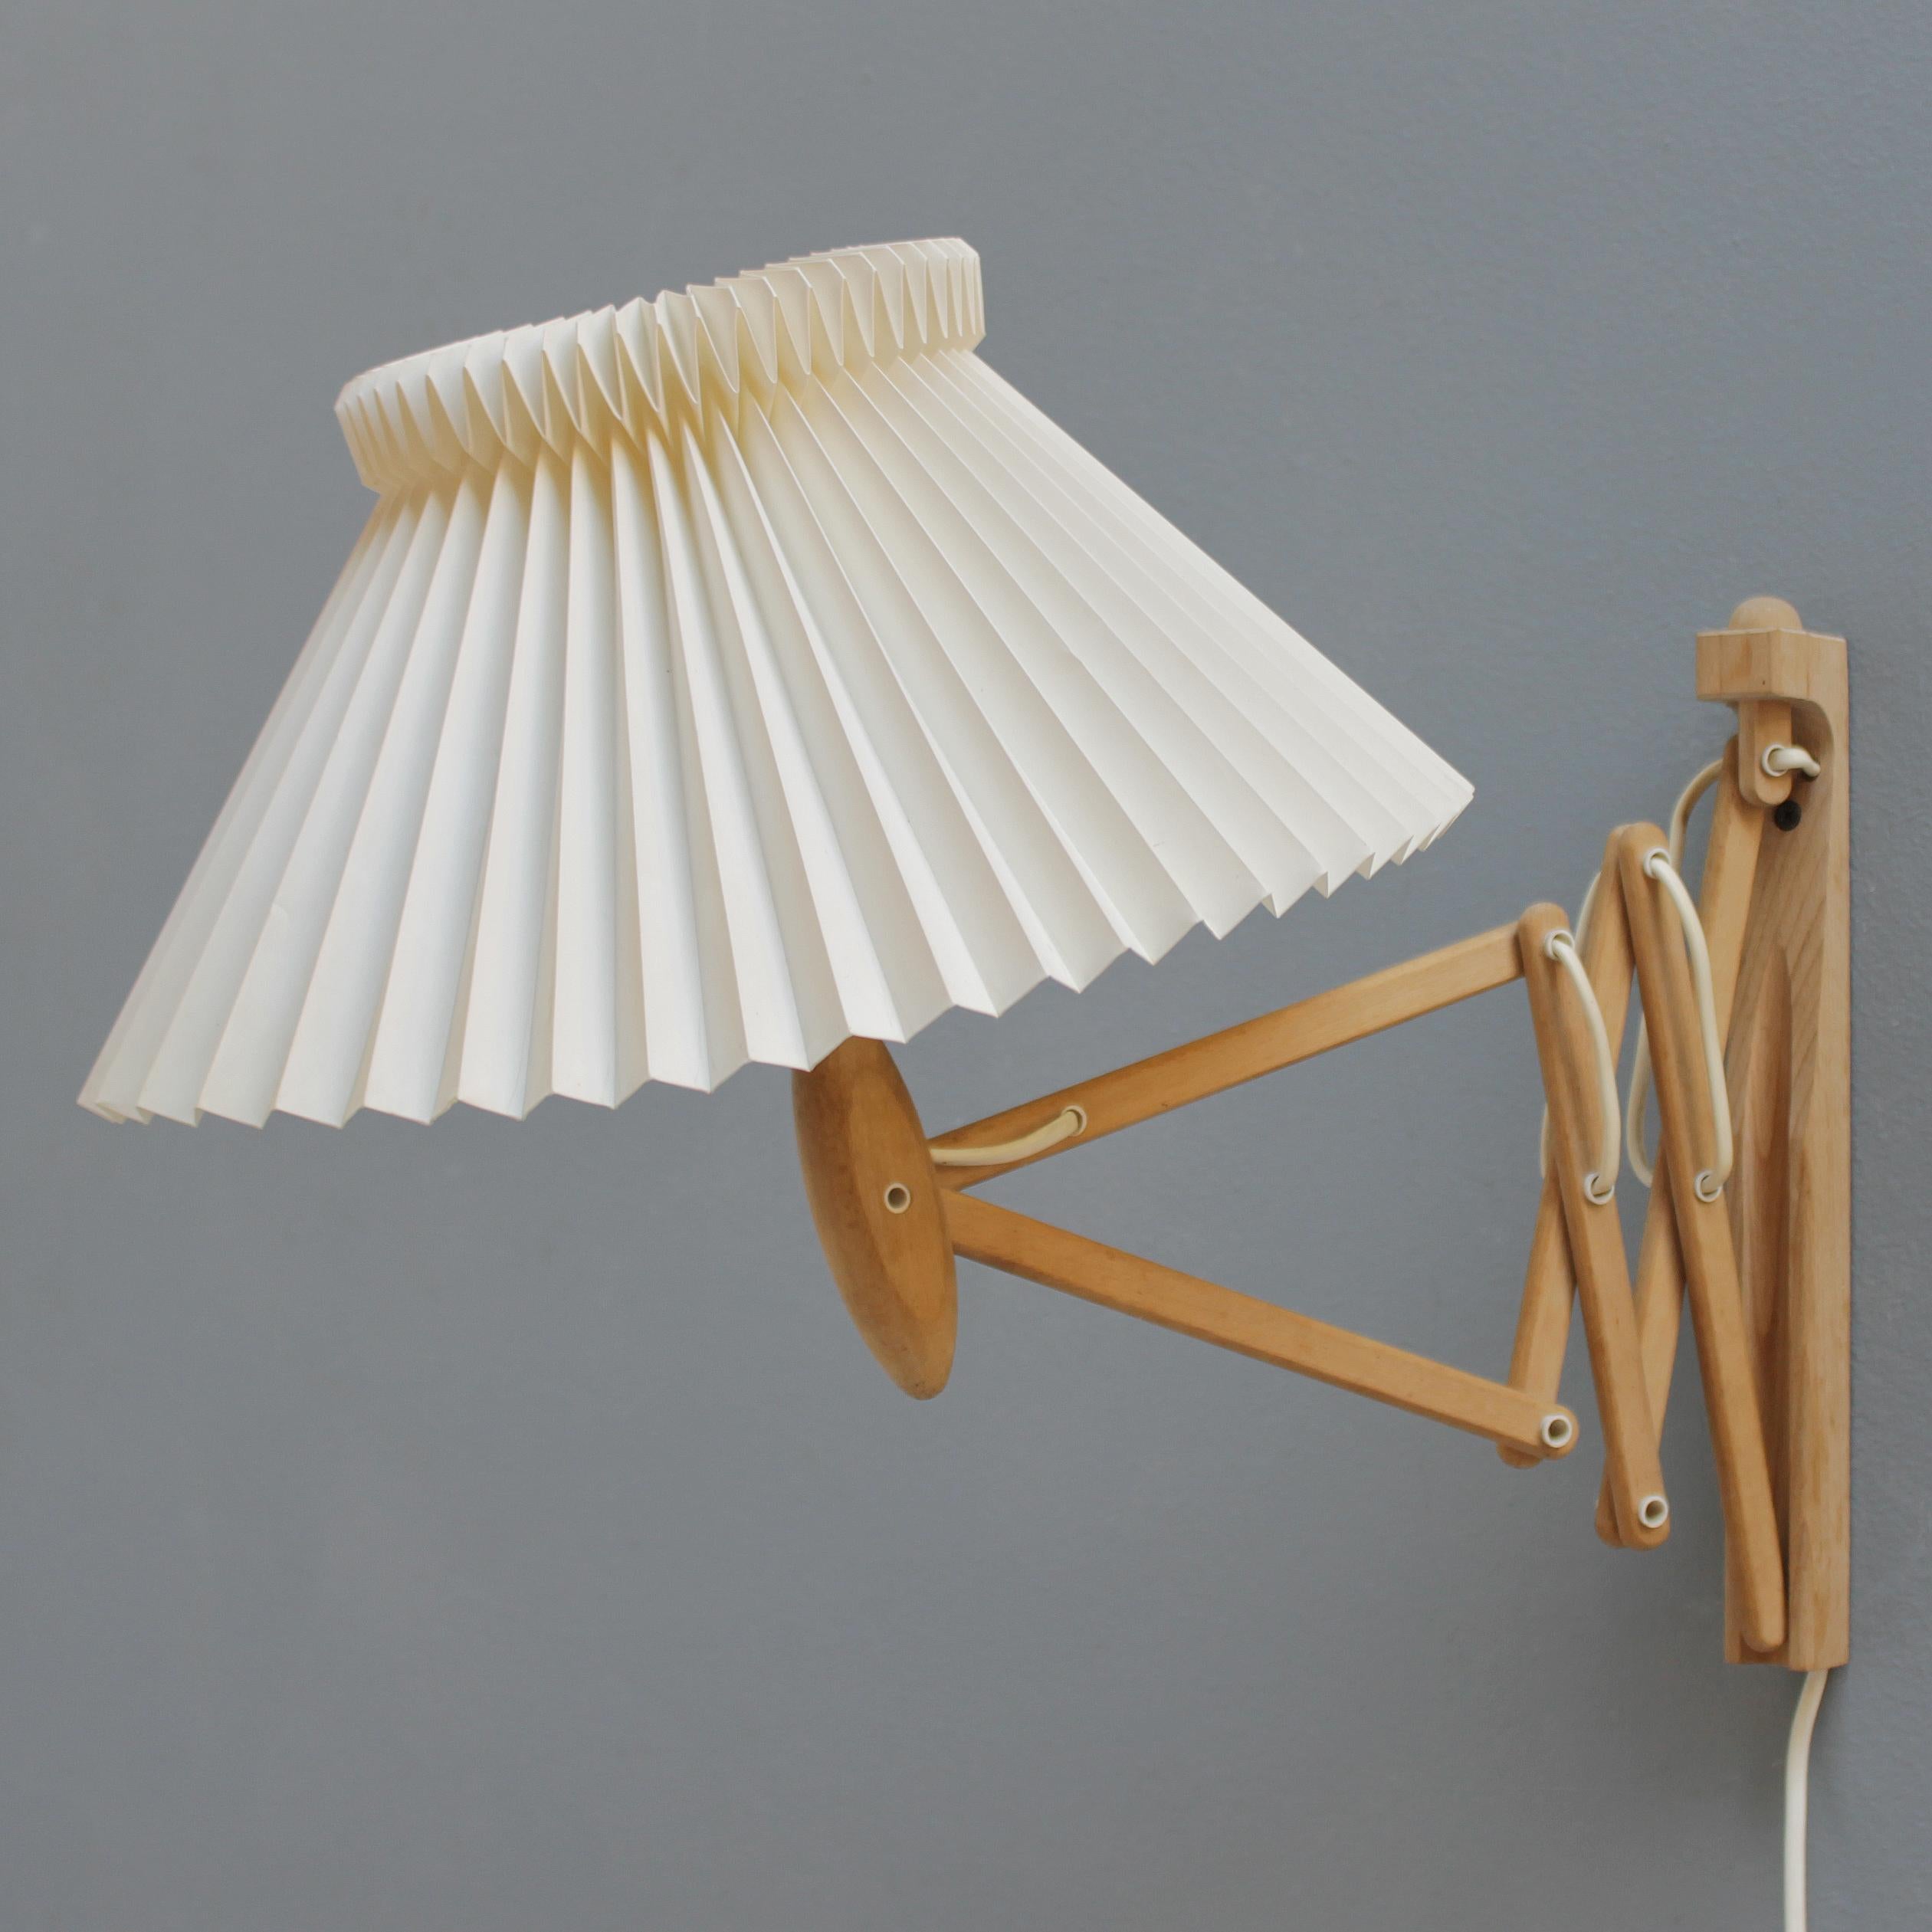 Le Klint 'Scissor' wall lamp by Erik Hansen, 1950. The 'scissor' is made of unvarnished beechwood. Marked.
The typical Le Klint shade is made from hand folded acrylic. The original shade has at one side some minor dents (see last